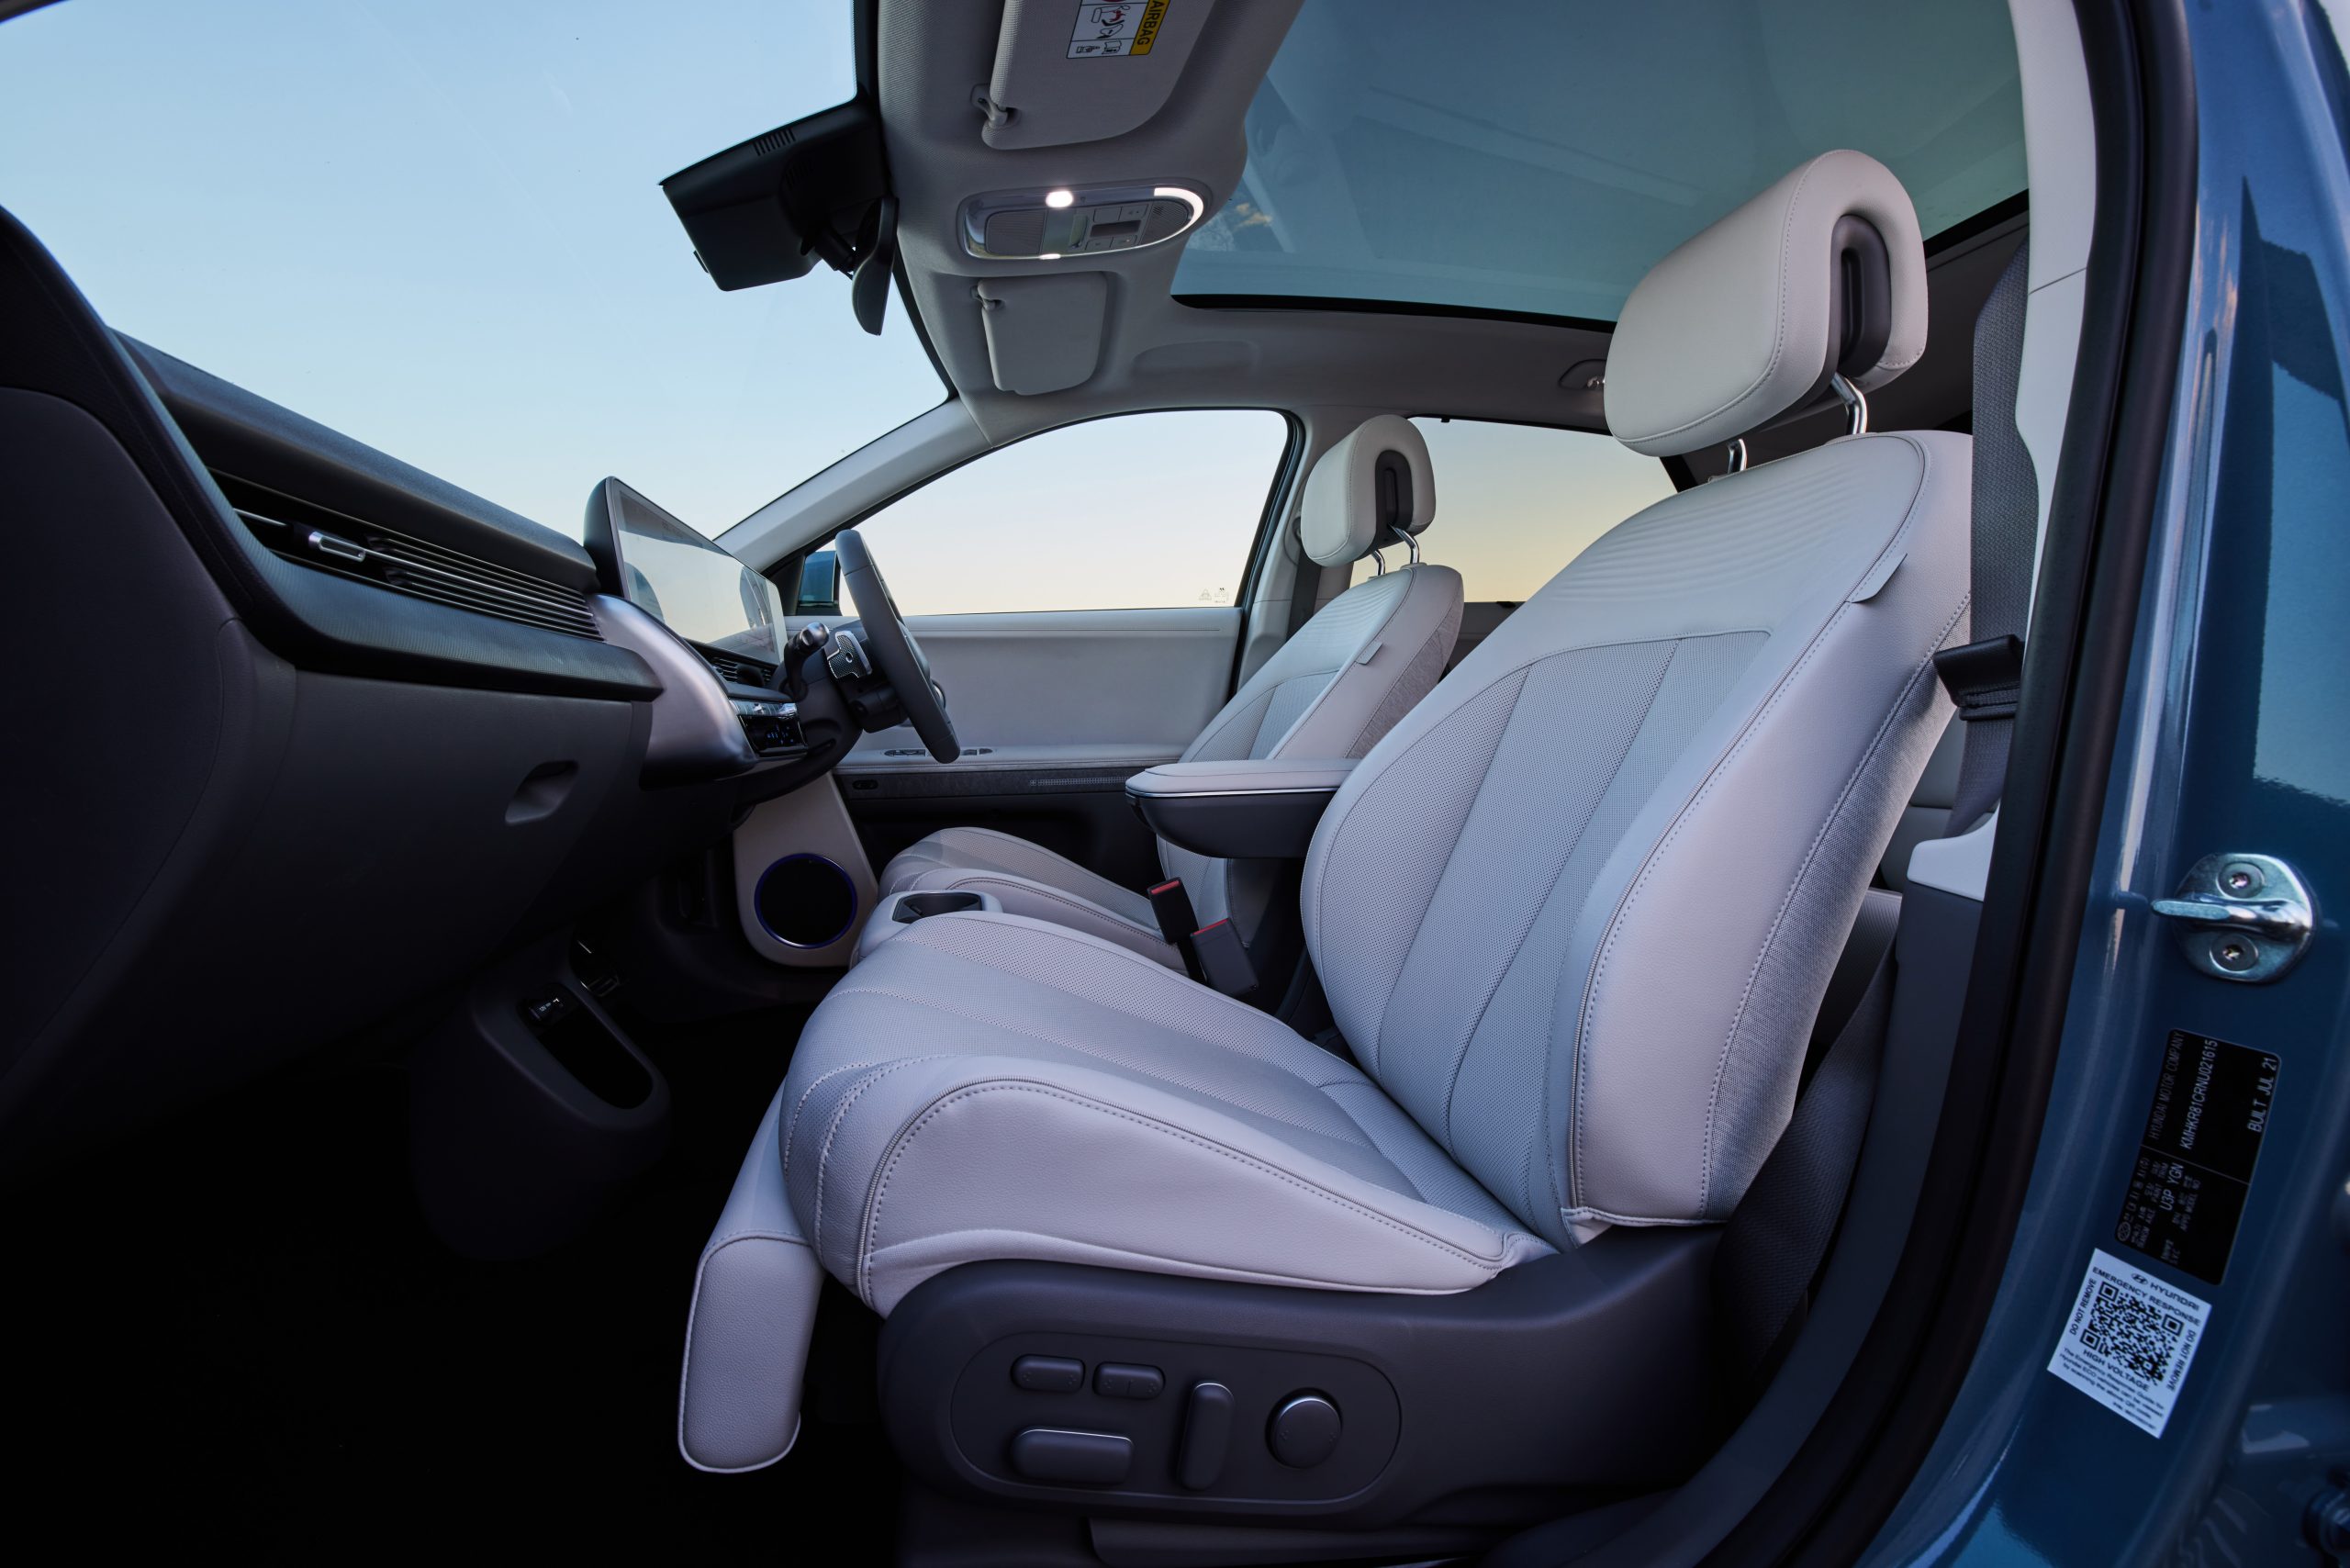 Hyundai IONIQ 5 inside cabin view looking across passenger and driver's white leather seats from passenger door